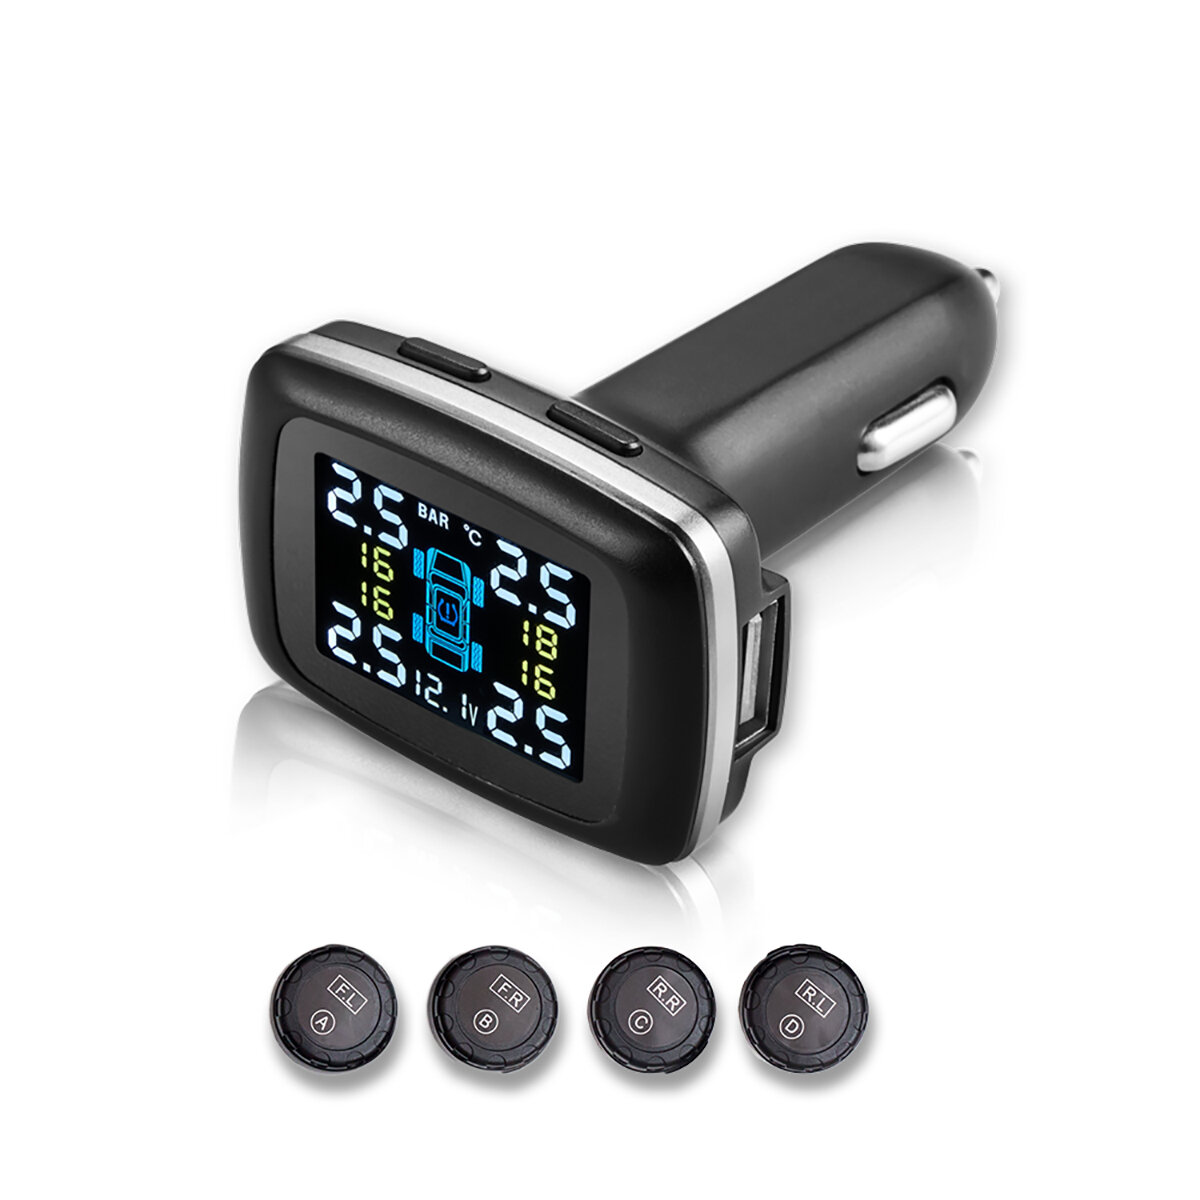 LCD 433.92MHz TPMS Wireless Car Tire Tyre Pressure Monitor Monitoring System + 4 Sensors Waterproof IP67